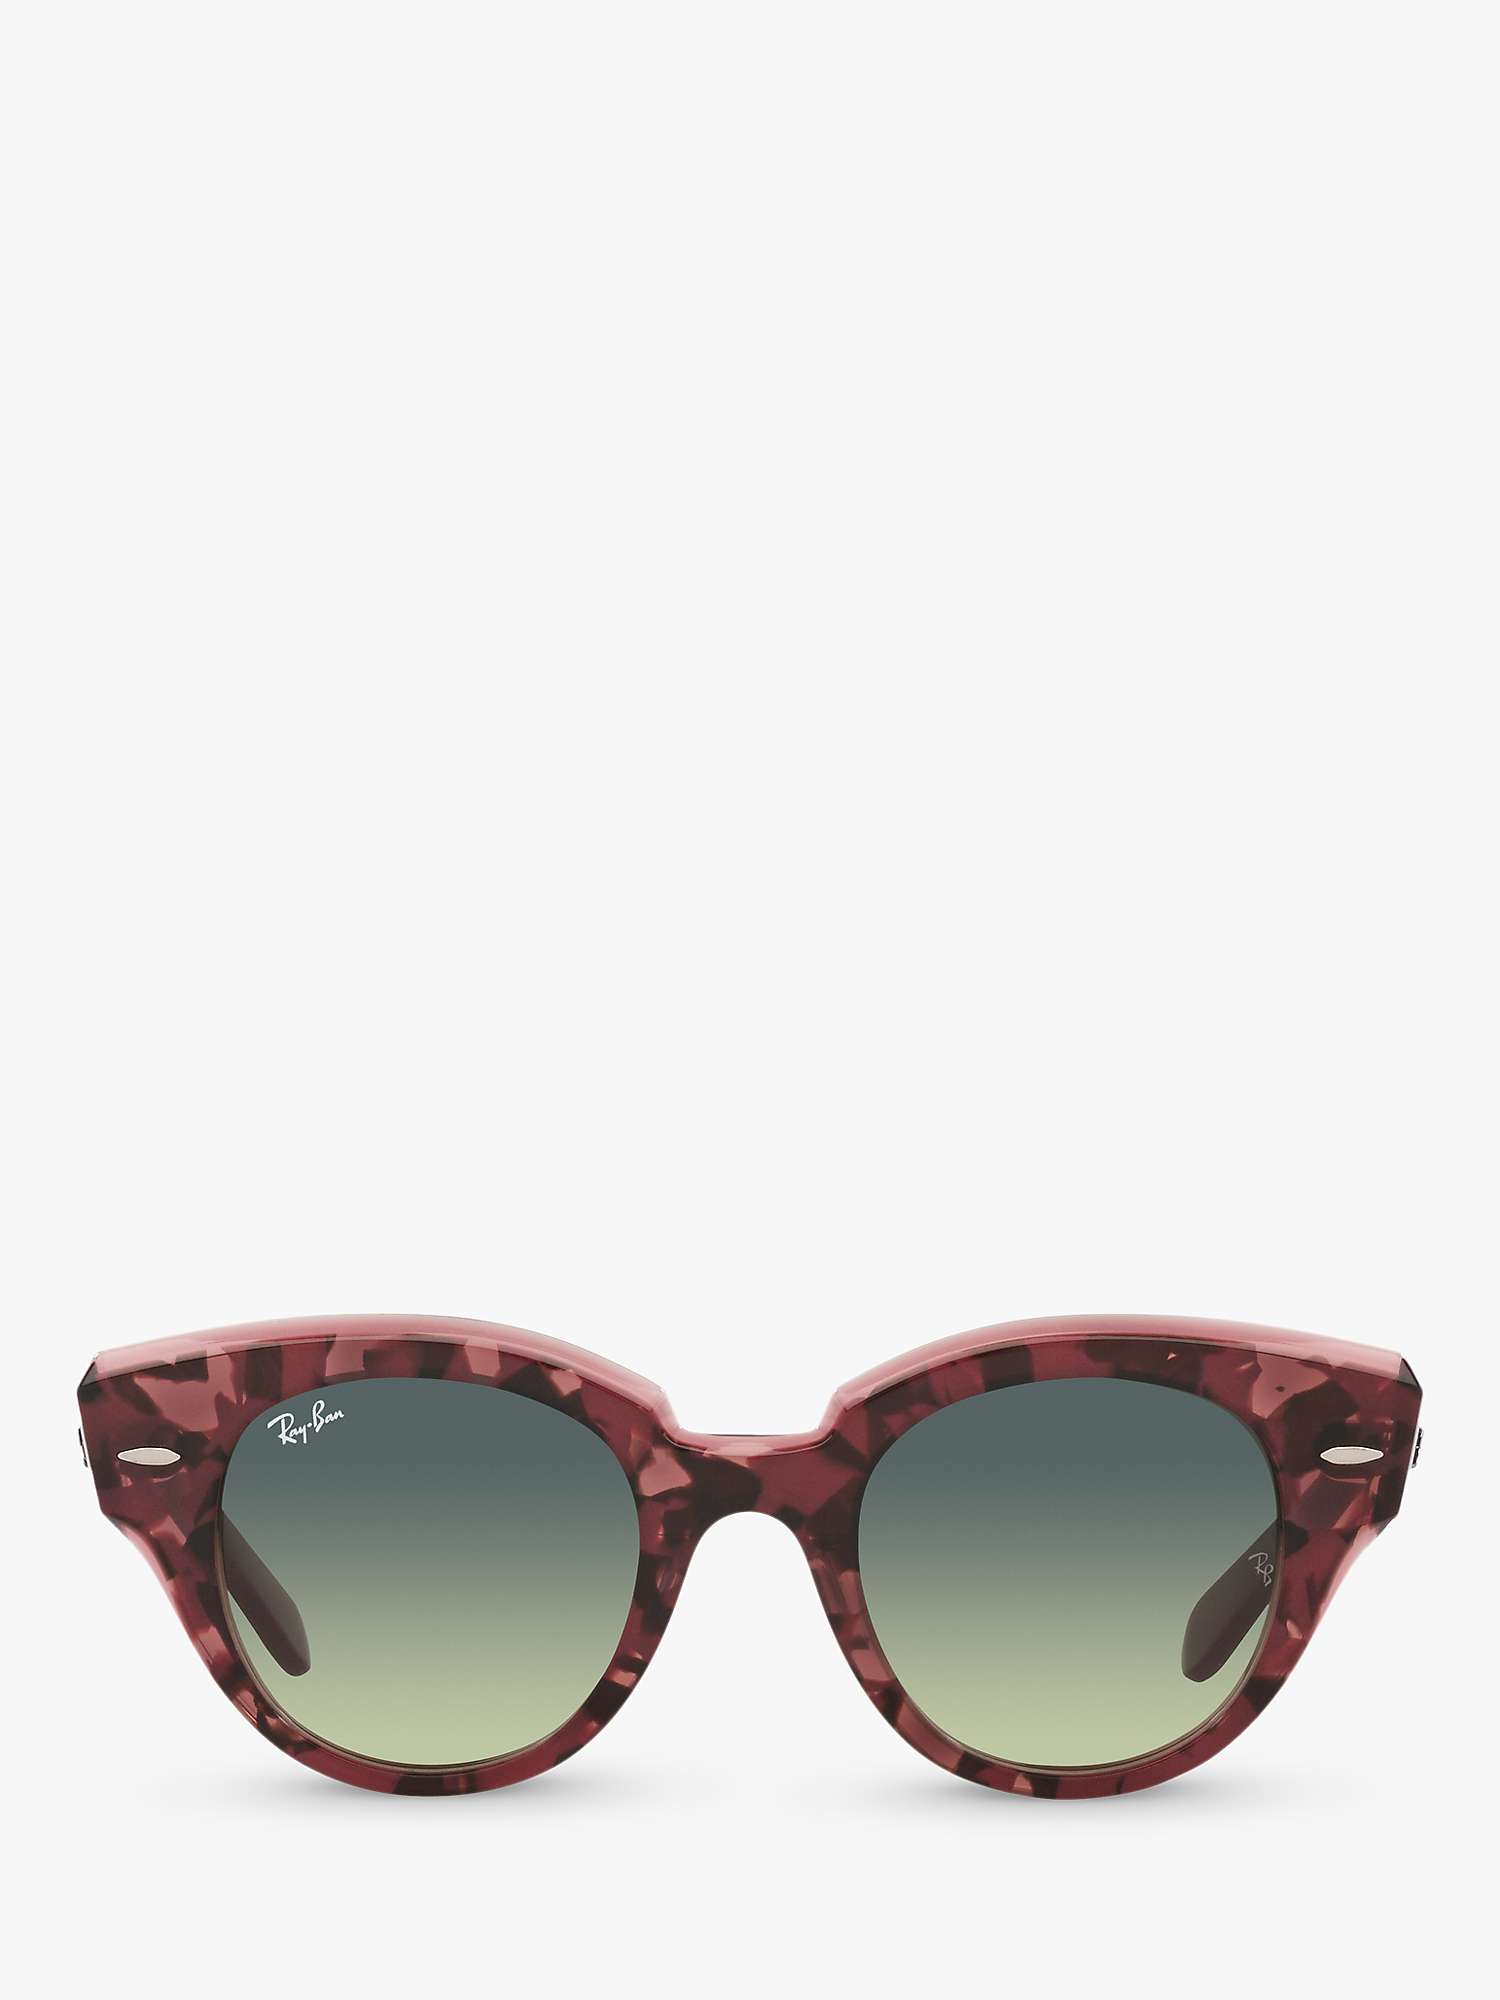 Buy Ray-Ban RB2192 Women's Round Sunglasses Online at johnlewis.com